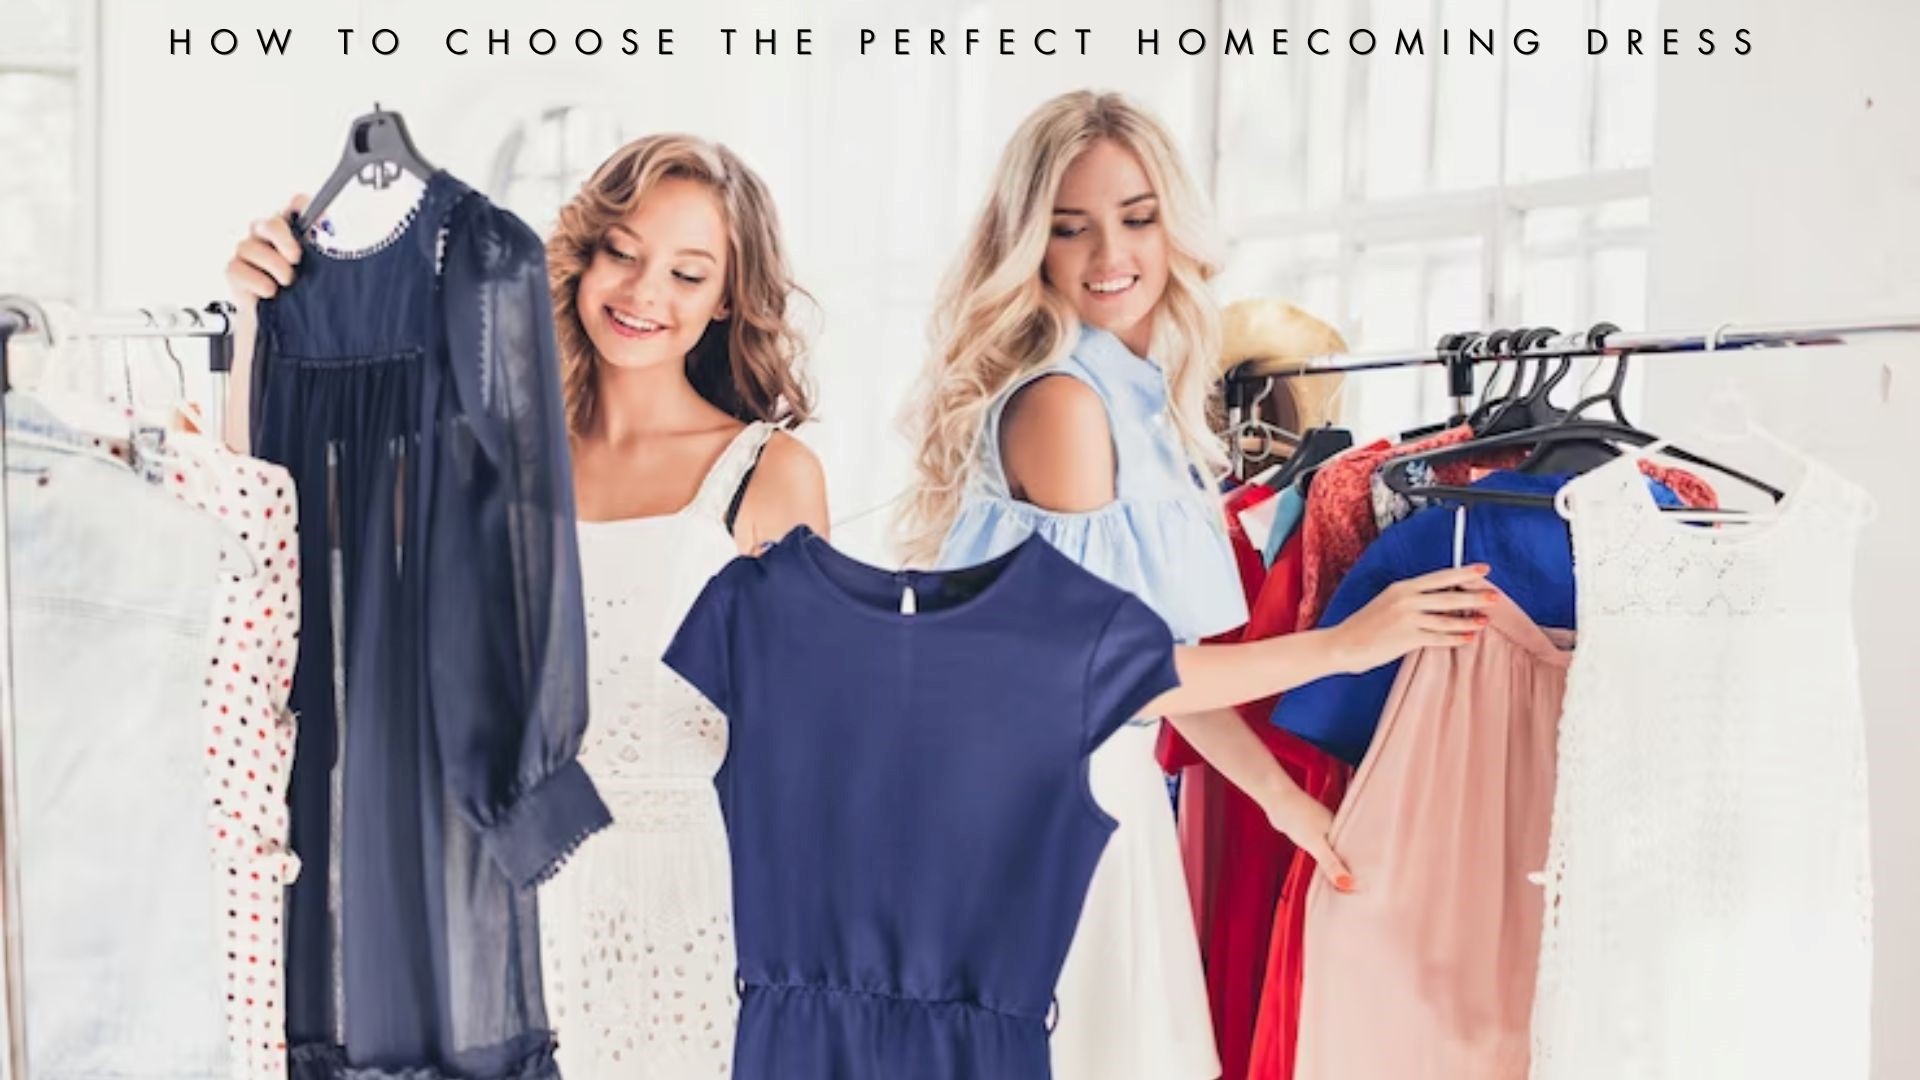 How to Choose the Perfect Homecoming Dress